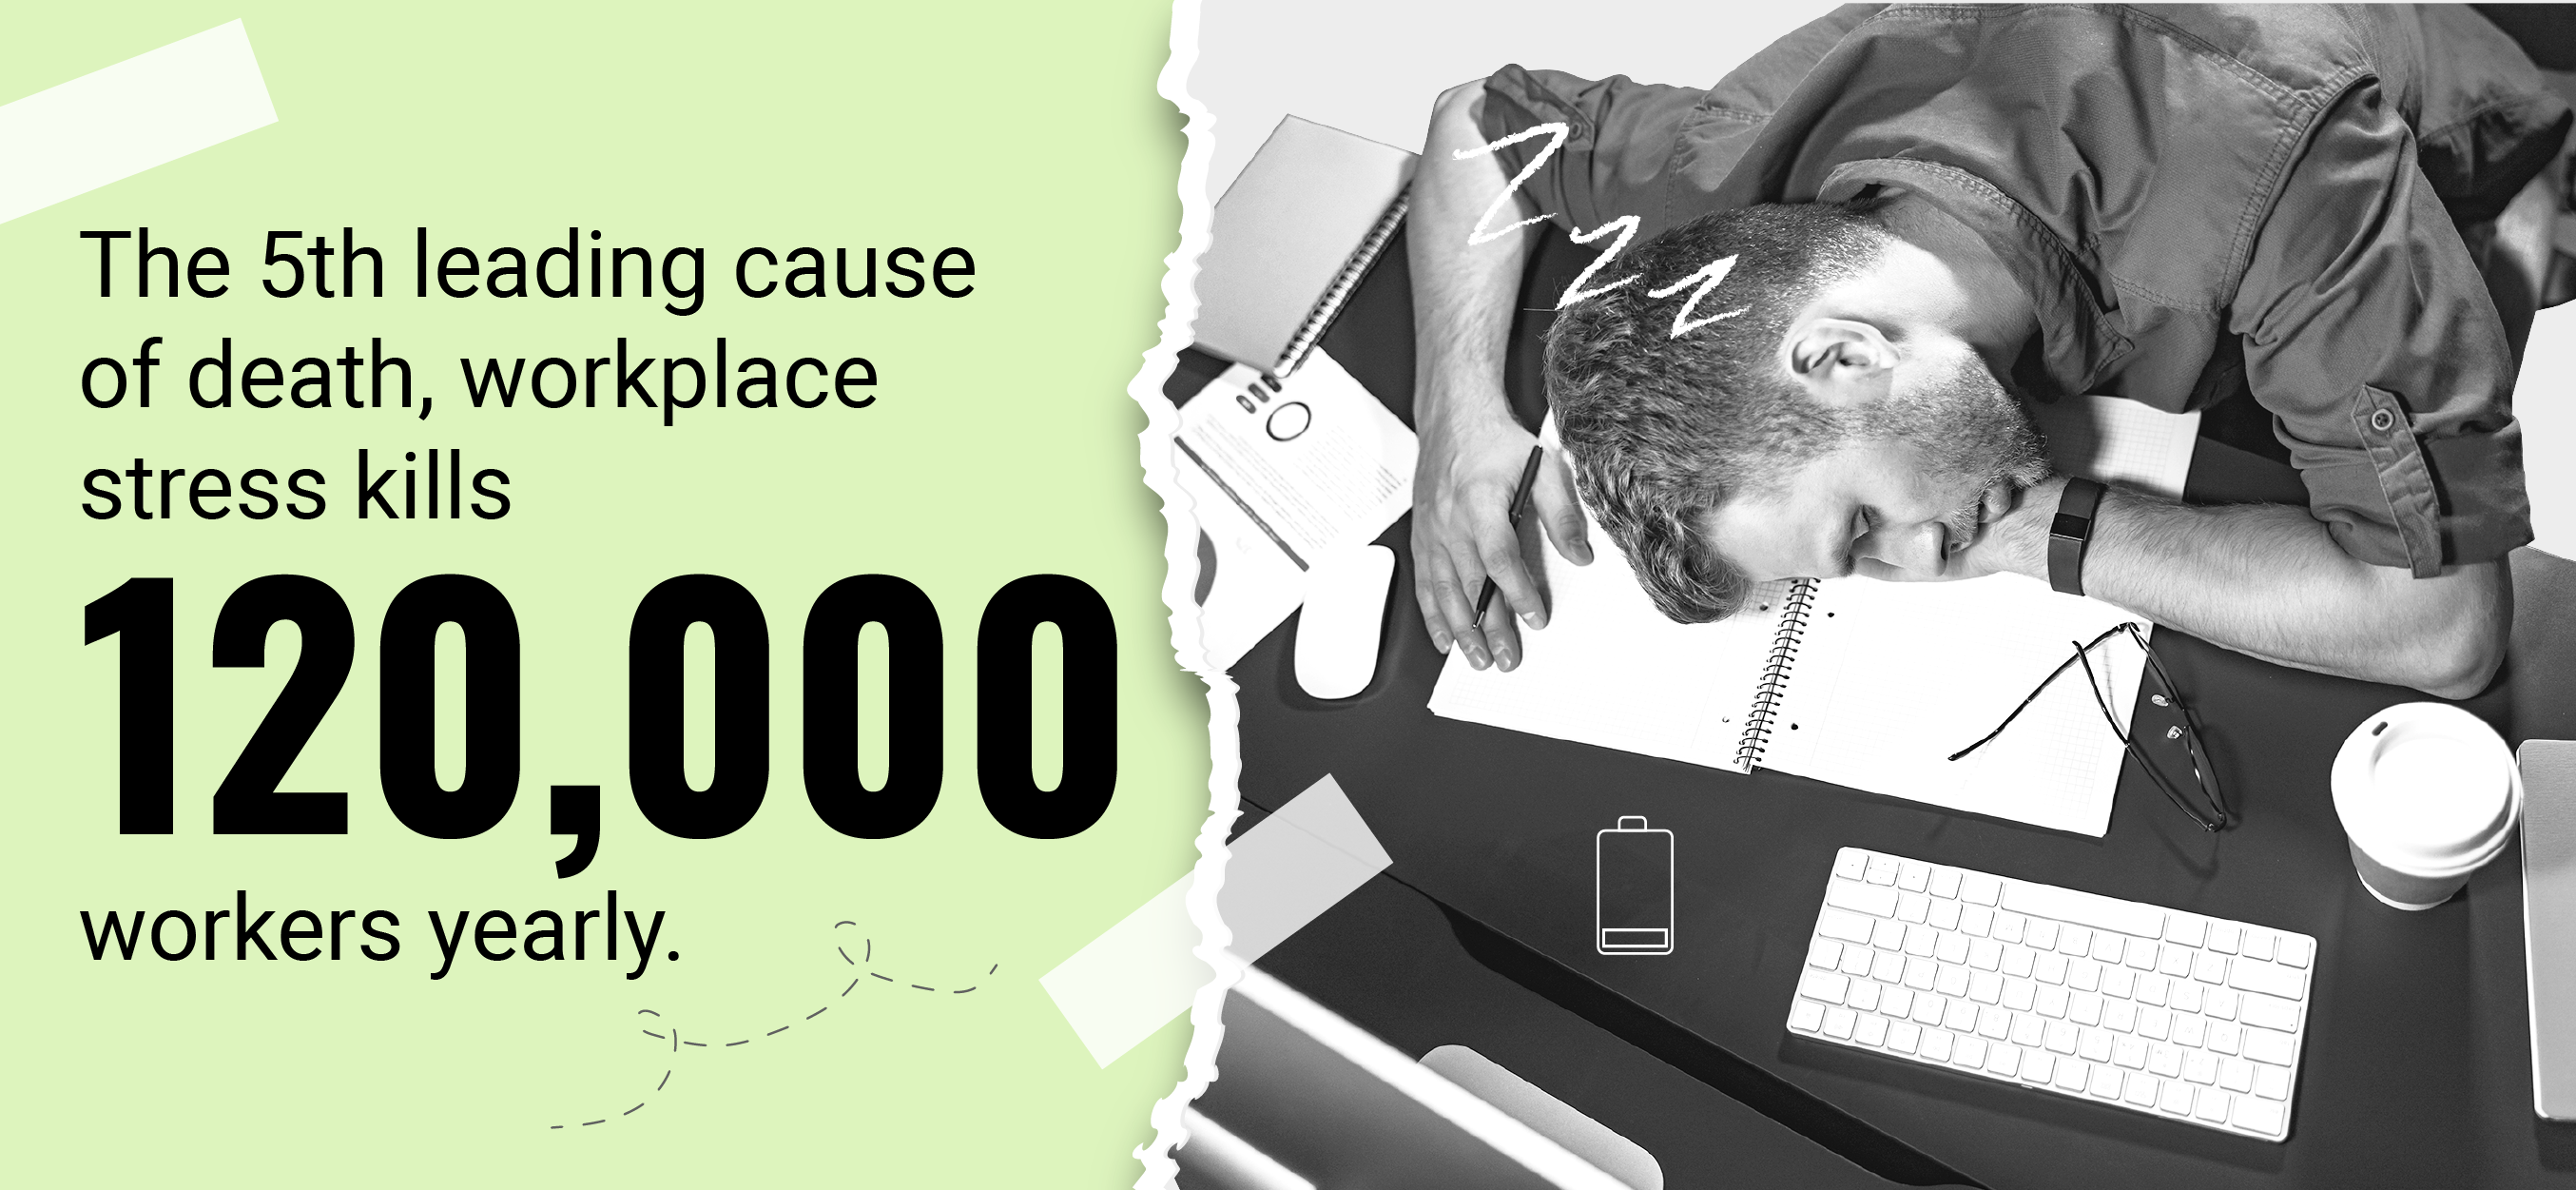 Call out text box saying workplace stress is the 5th leading cause of death and kills 120,000 workers yearly.